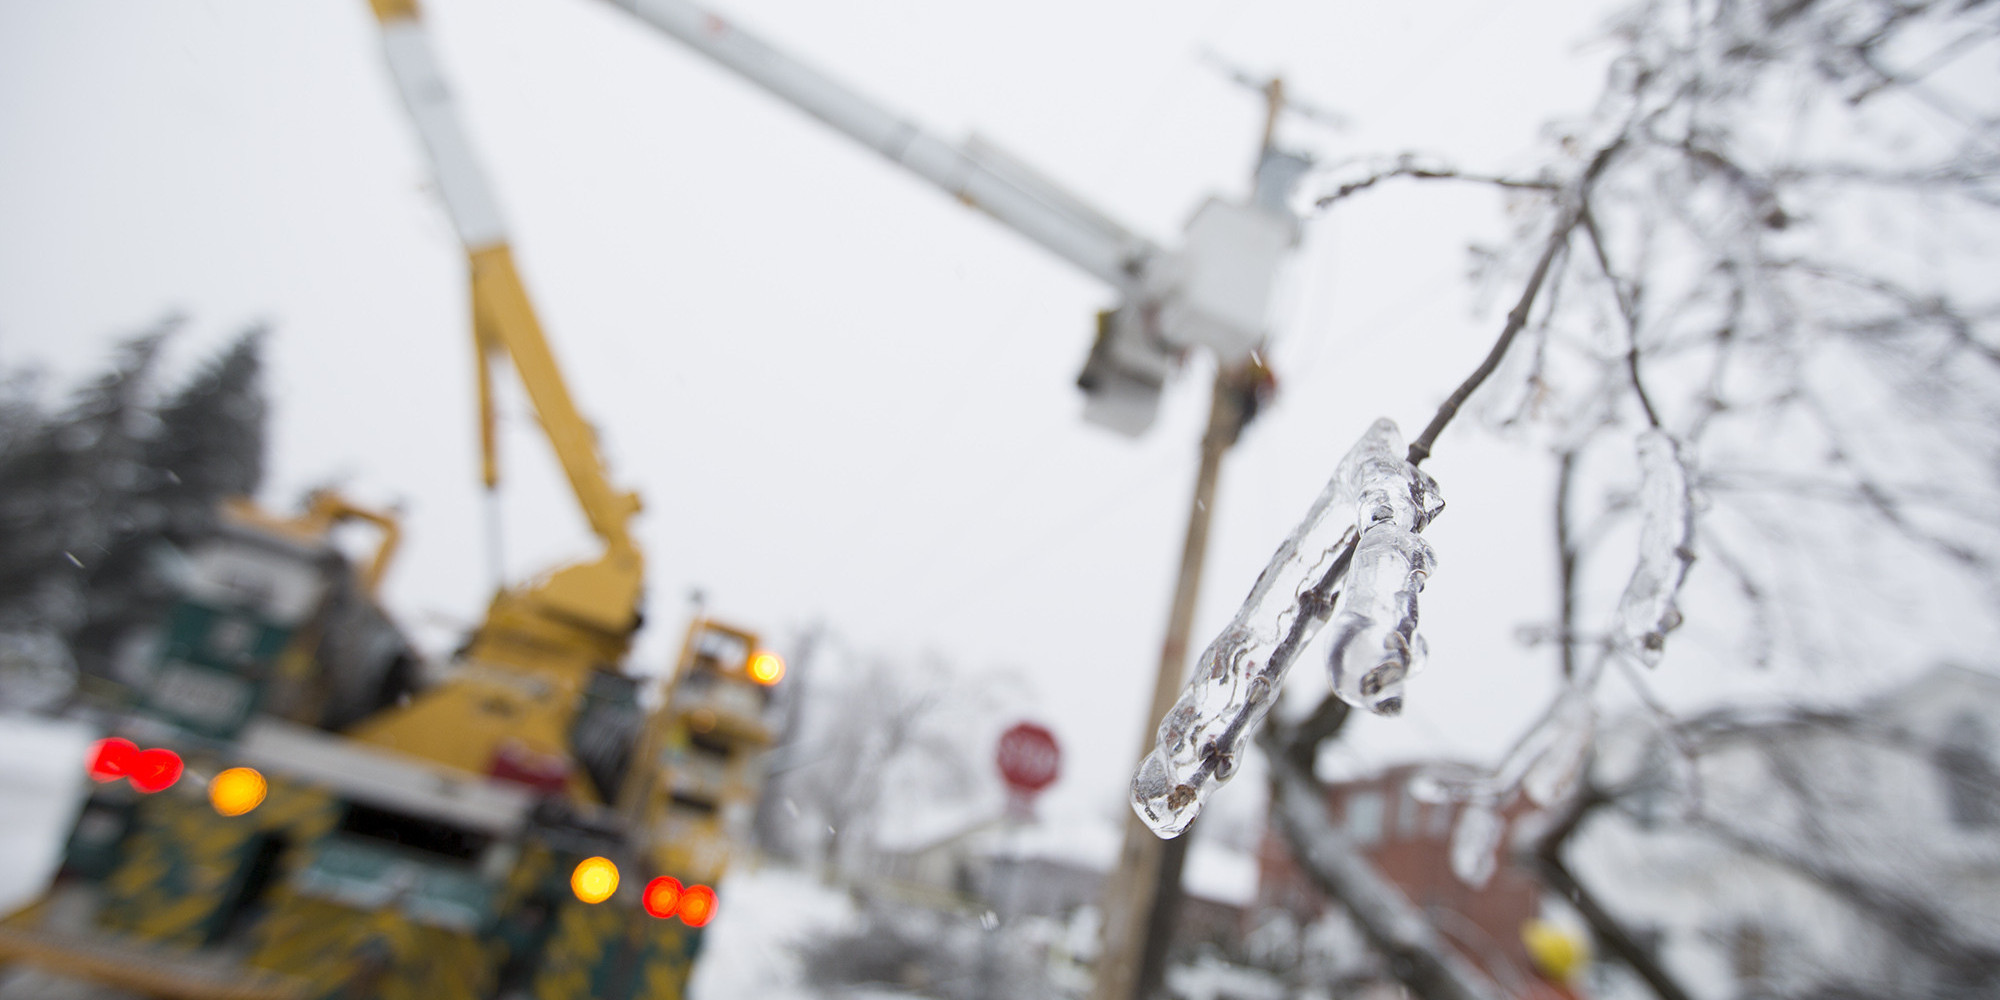 Toronto Ice Storm Spurs Creation Of New Emergency Plan - Huffington Post Canada